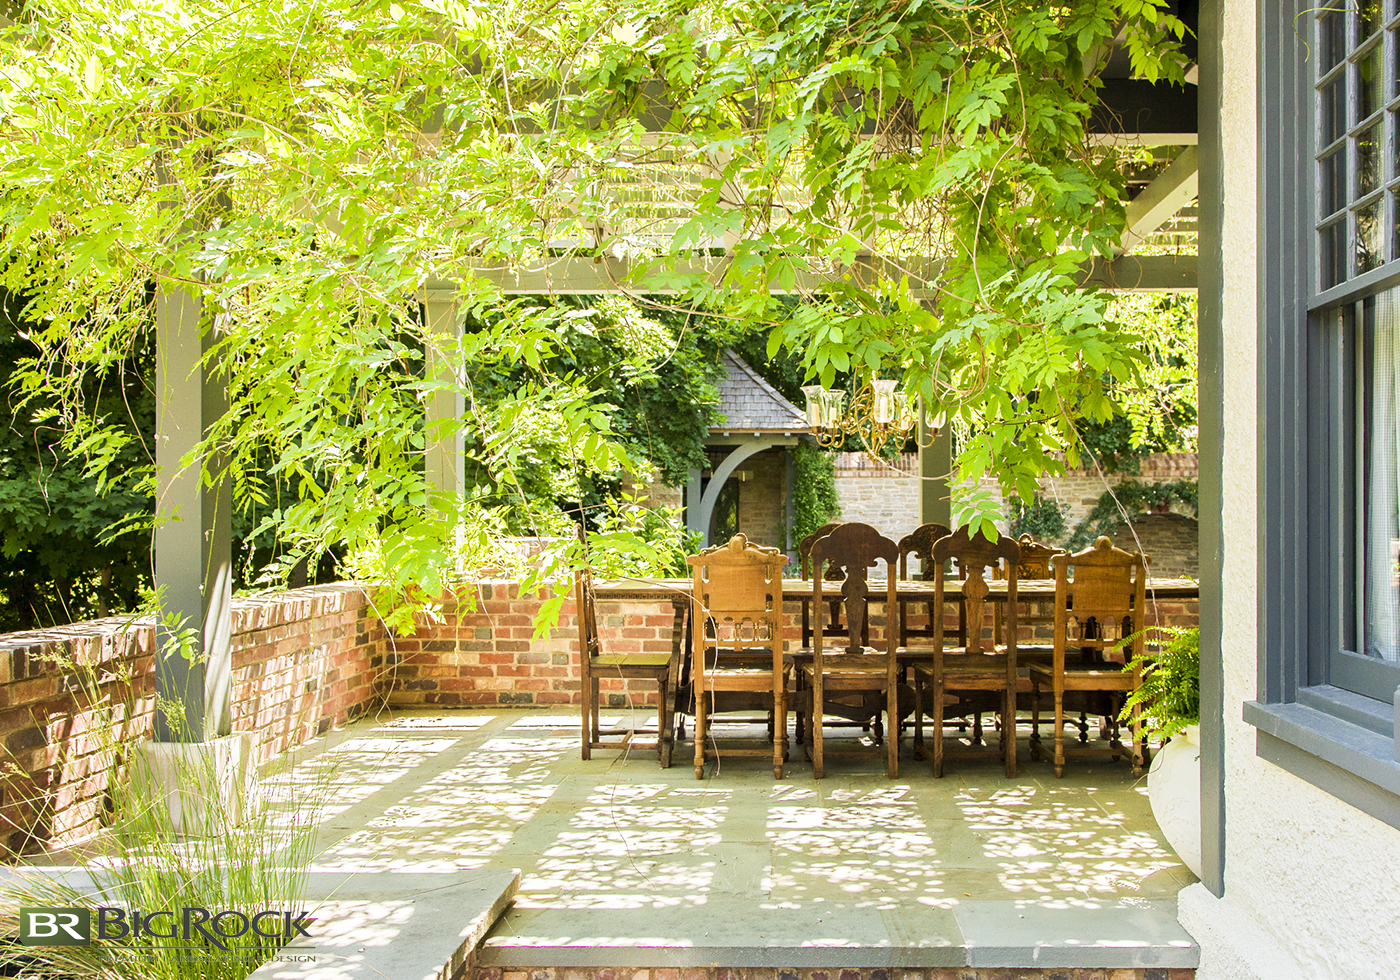 Use trailing plants above your pergola to create a natural canopy and shady environment on your backyard patio.